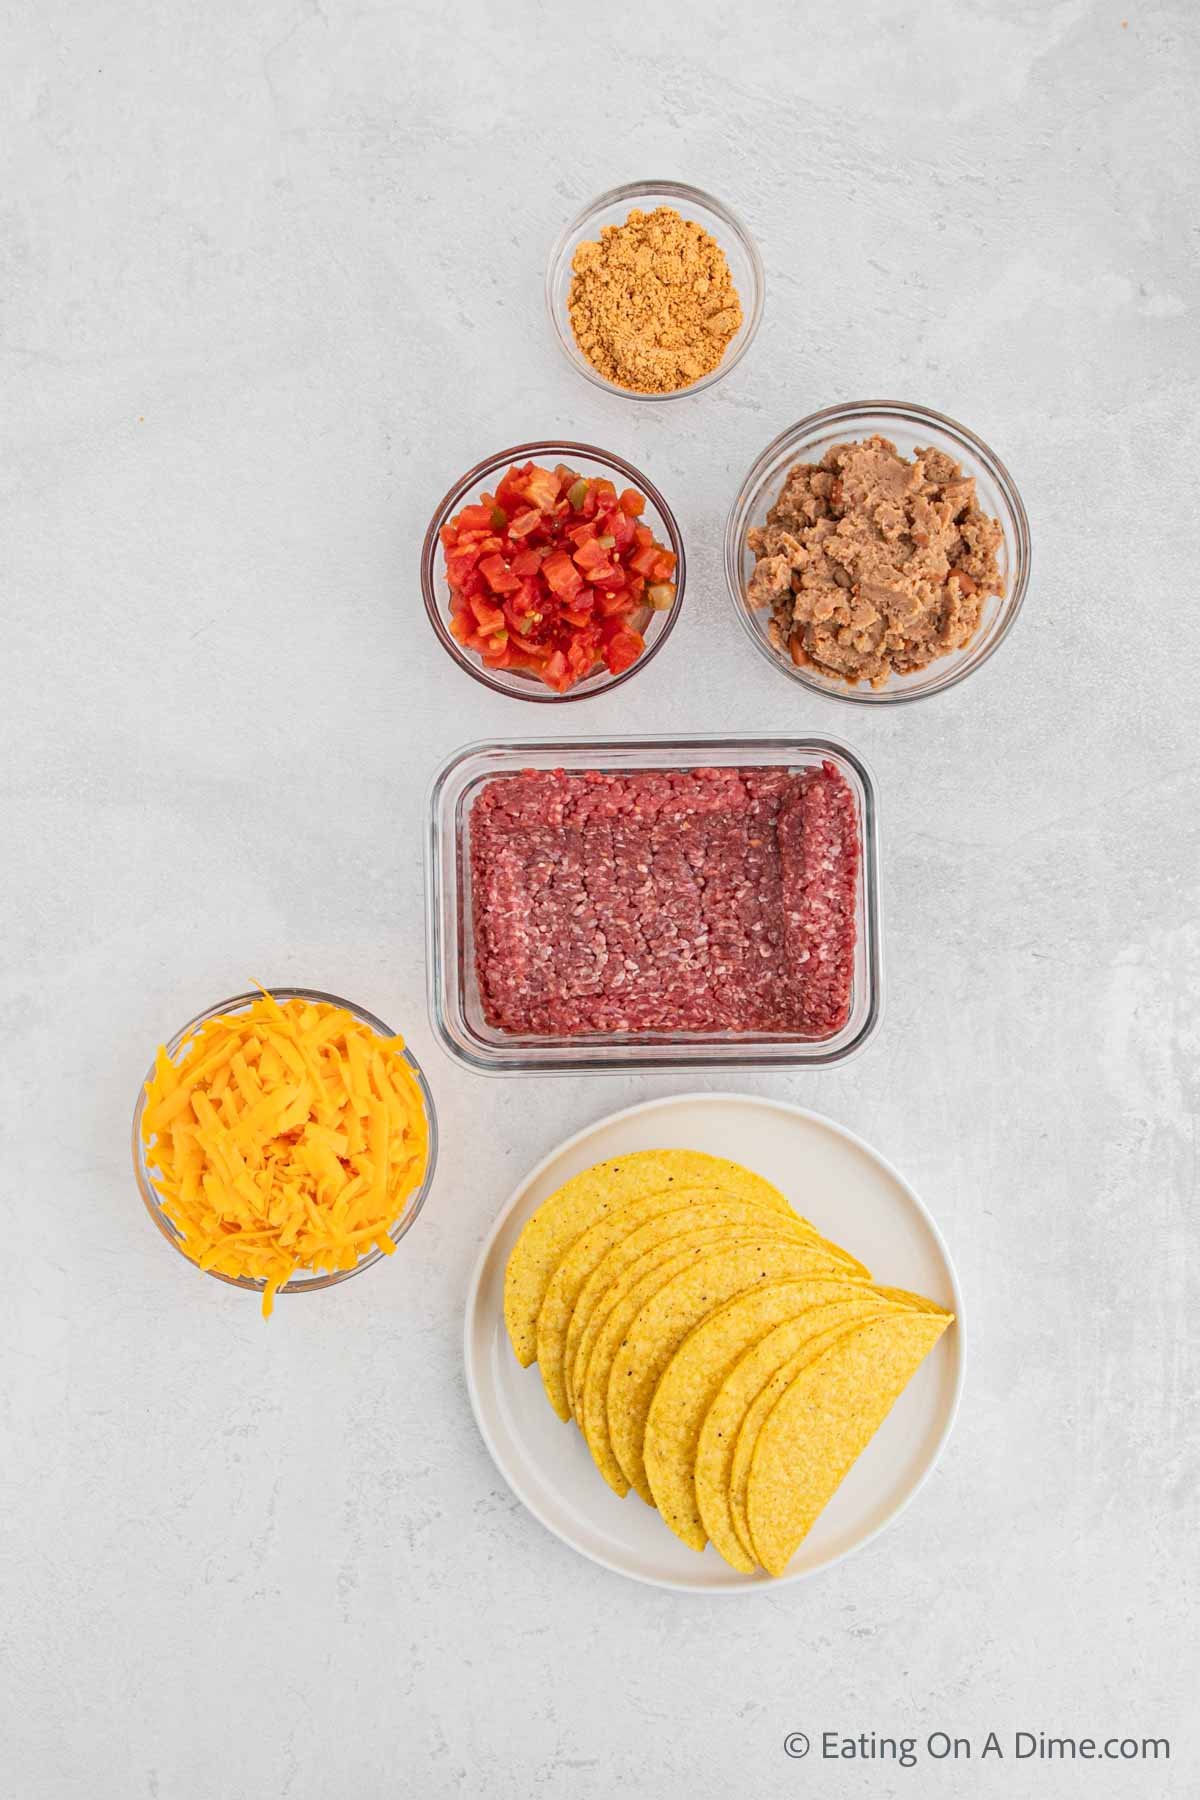 Oven baked tacos ingredients - ground beef, rotel, refried beans, taco seasoning, corn taco shells, cheese